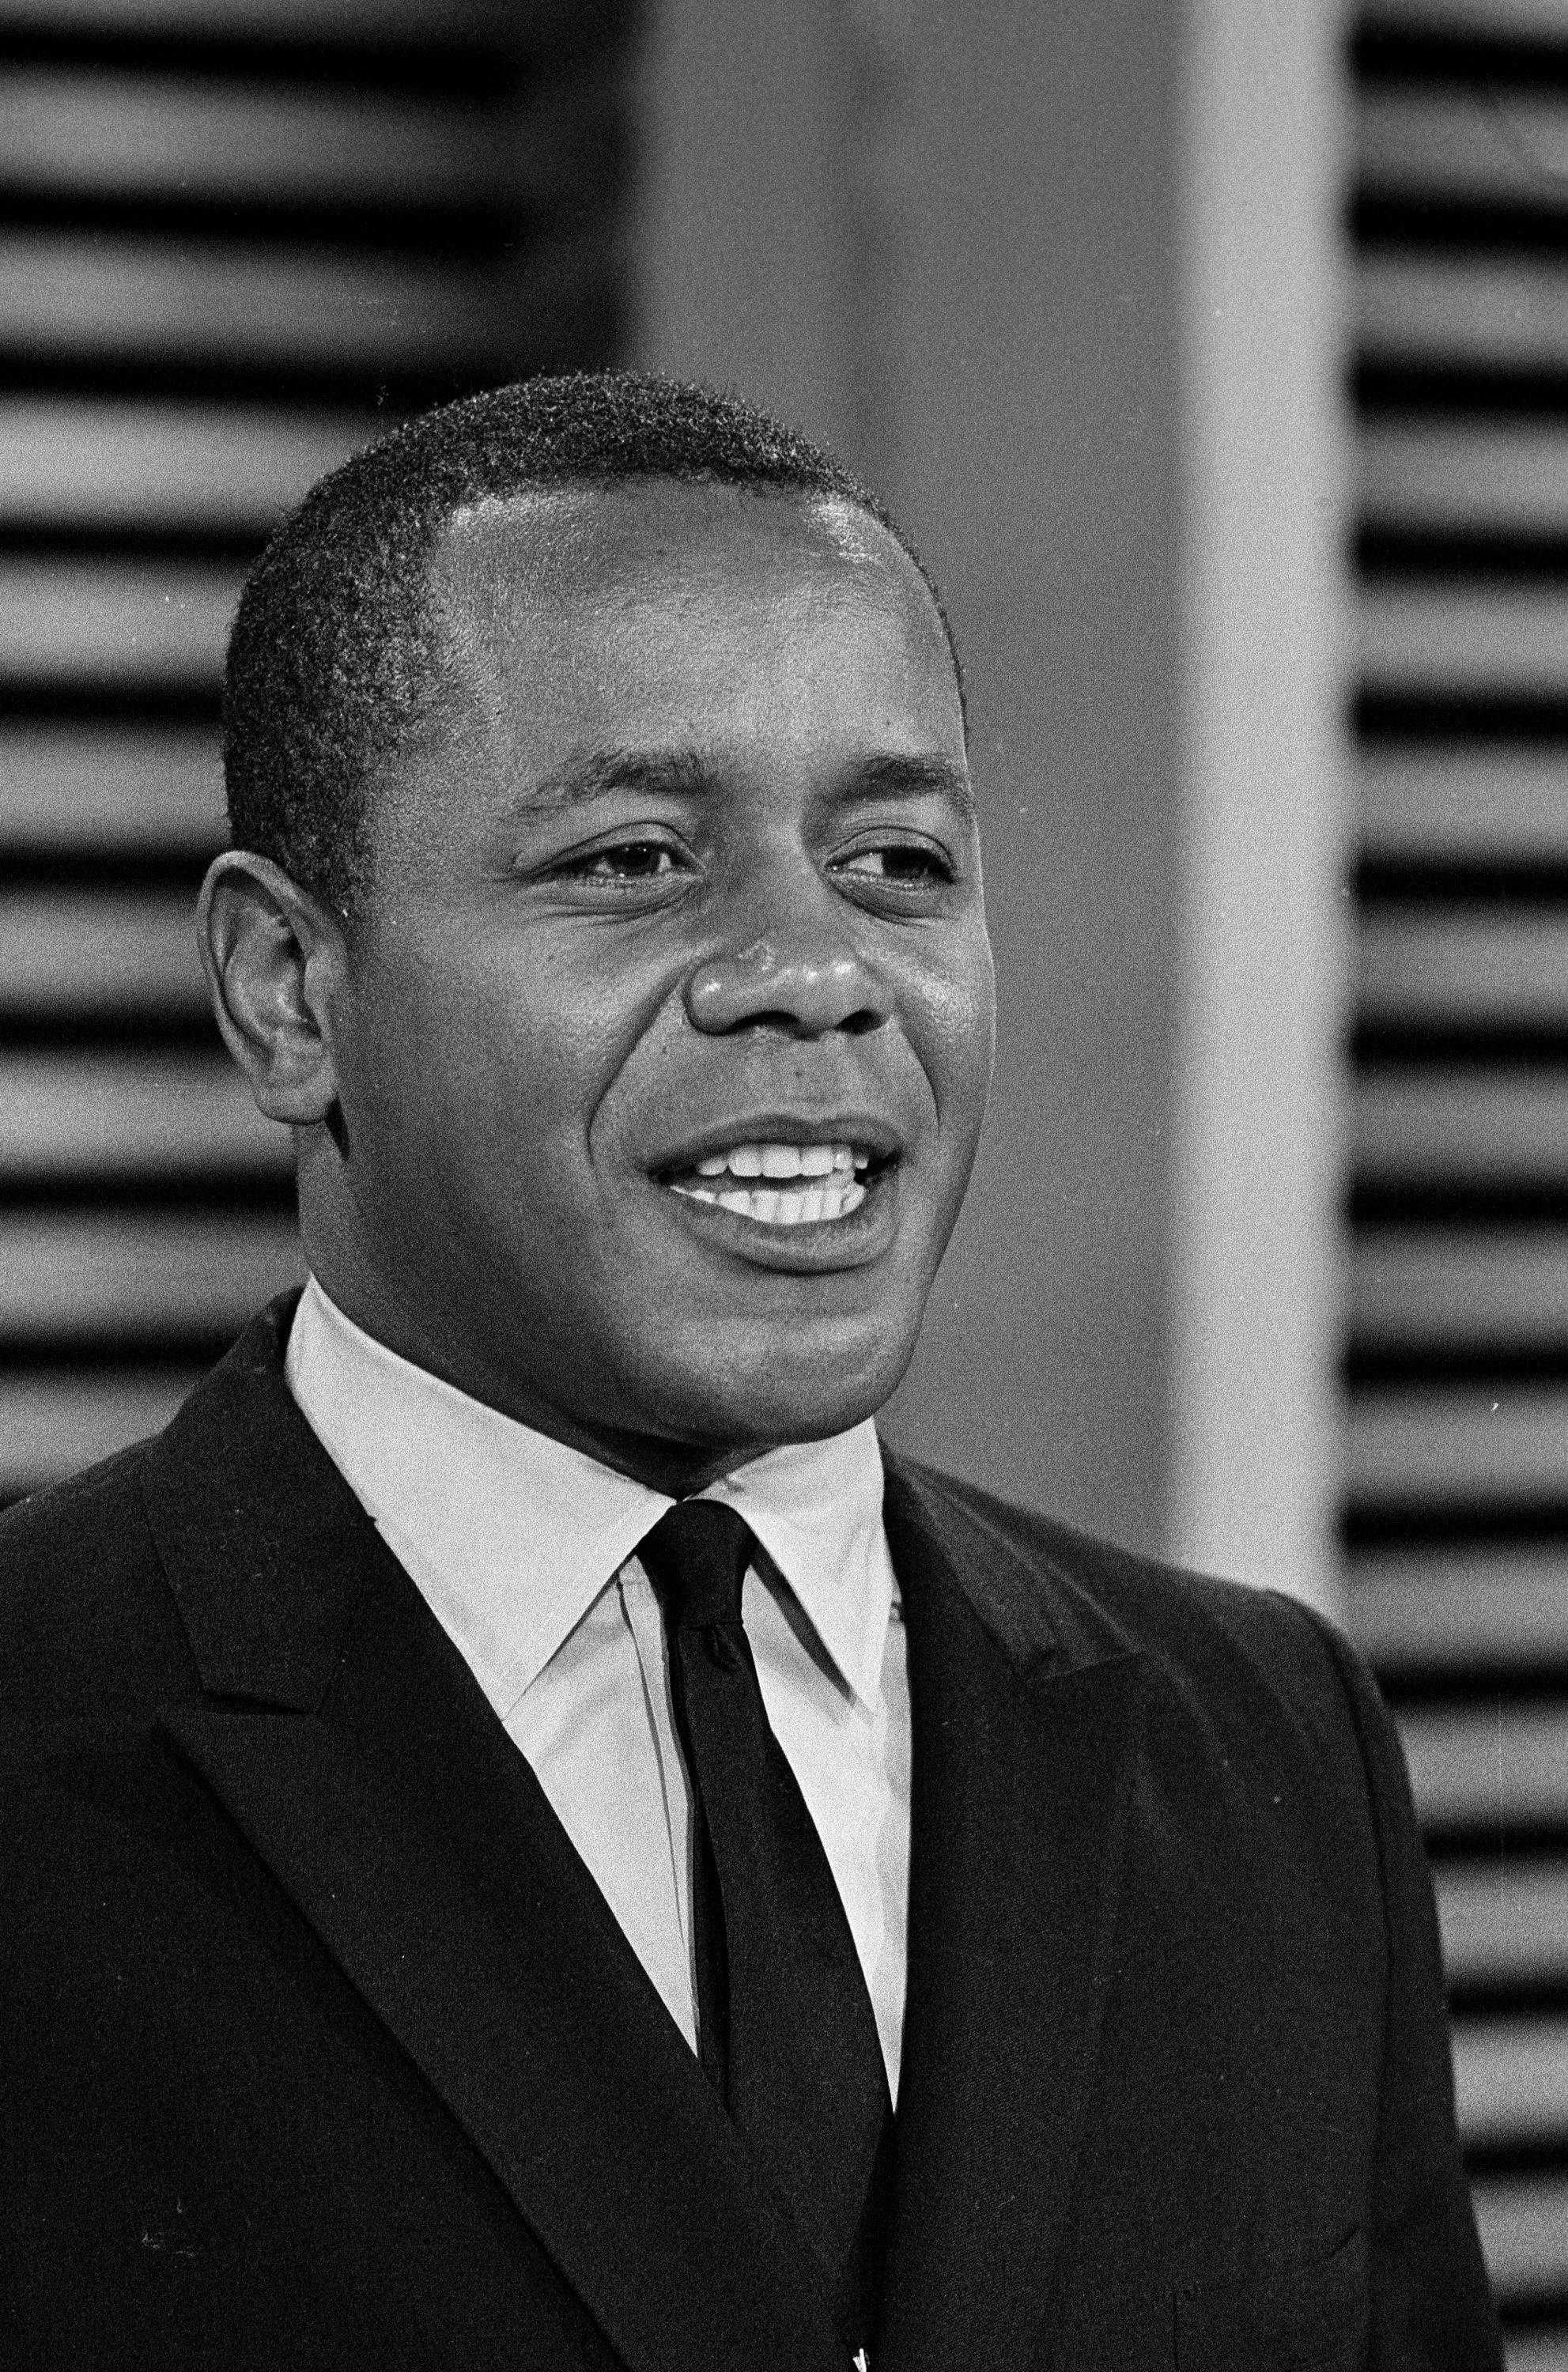  Flip Wilson on THE SUMMER BROTHERS BROTHERS SMOTHERS SHOW | Photo: Getty Images